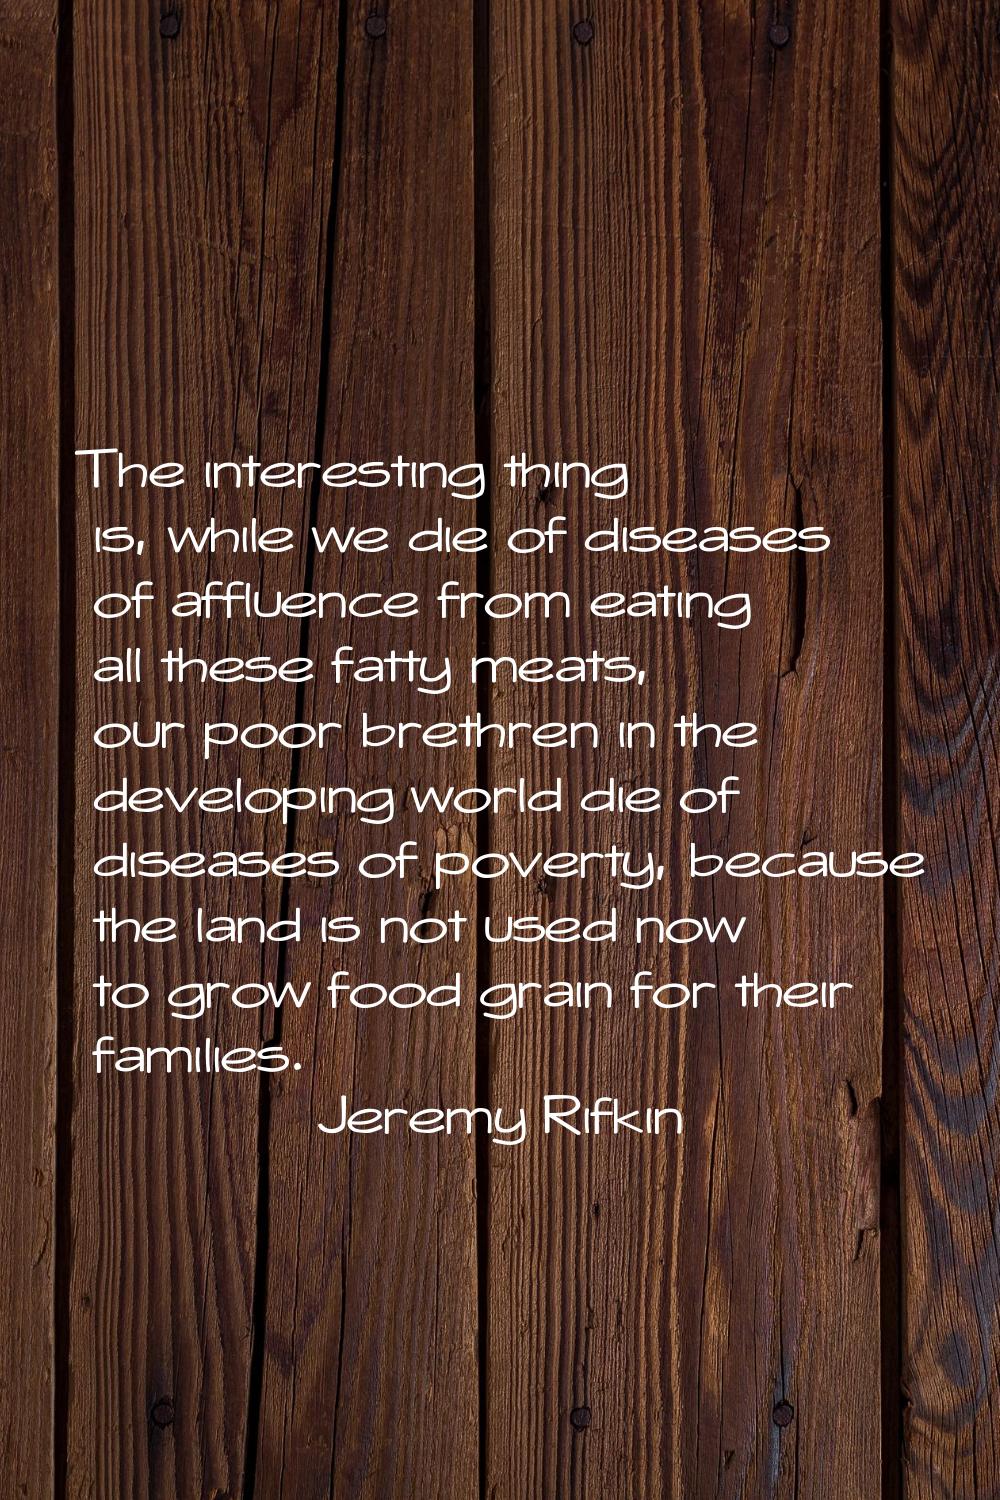 The interesting thing is, while we die of diseases of affluence from eating all these fatty meats, 